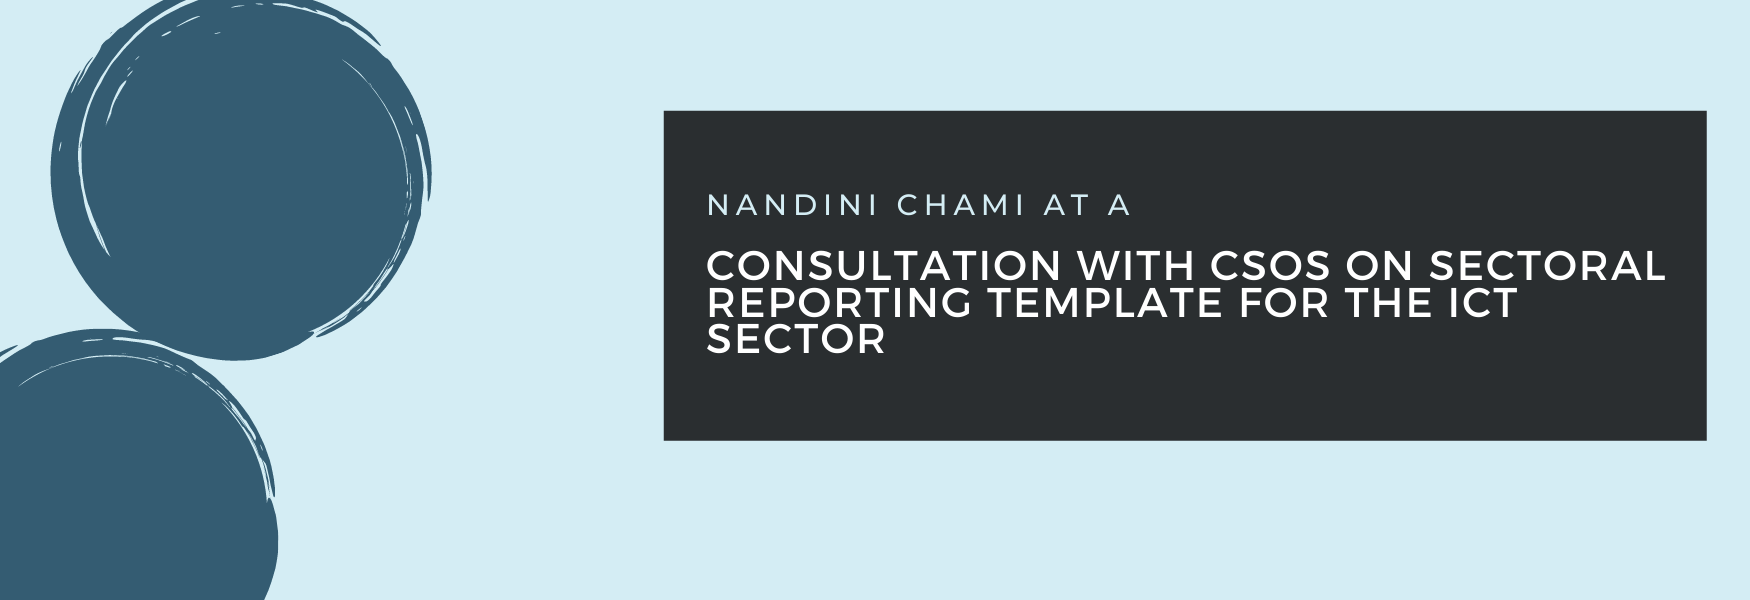 Consultation with CSOs on Sectoral Reporting Template for the ICT Sector